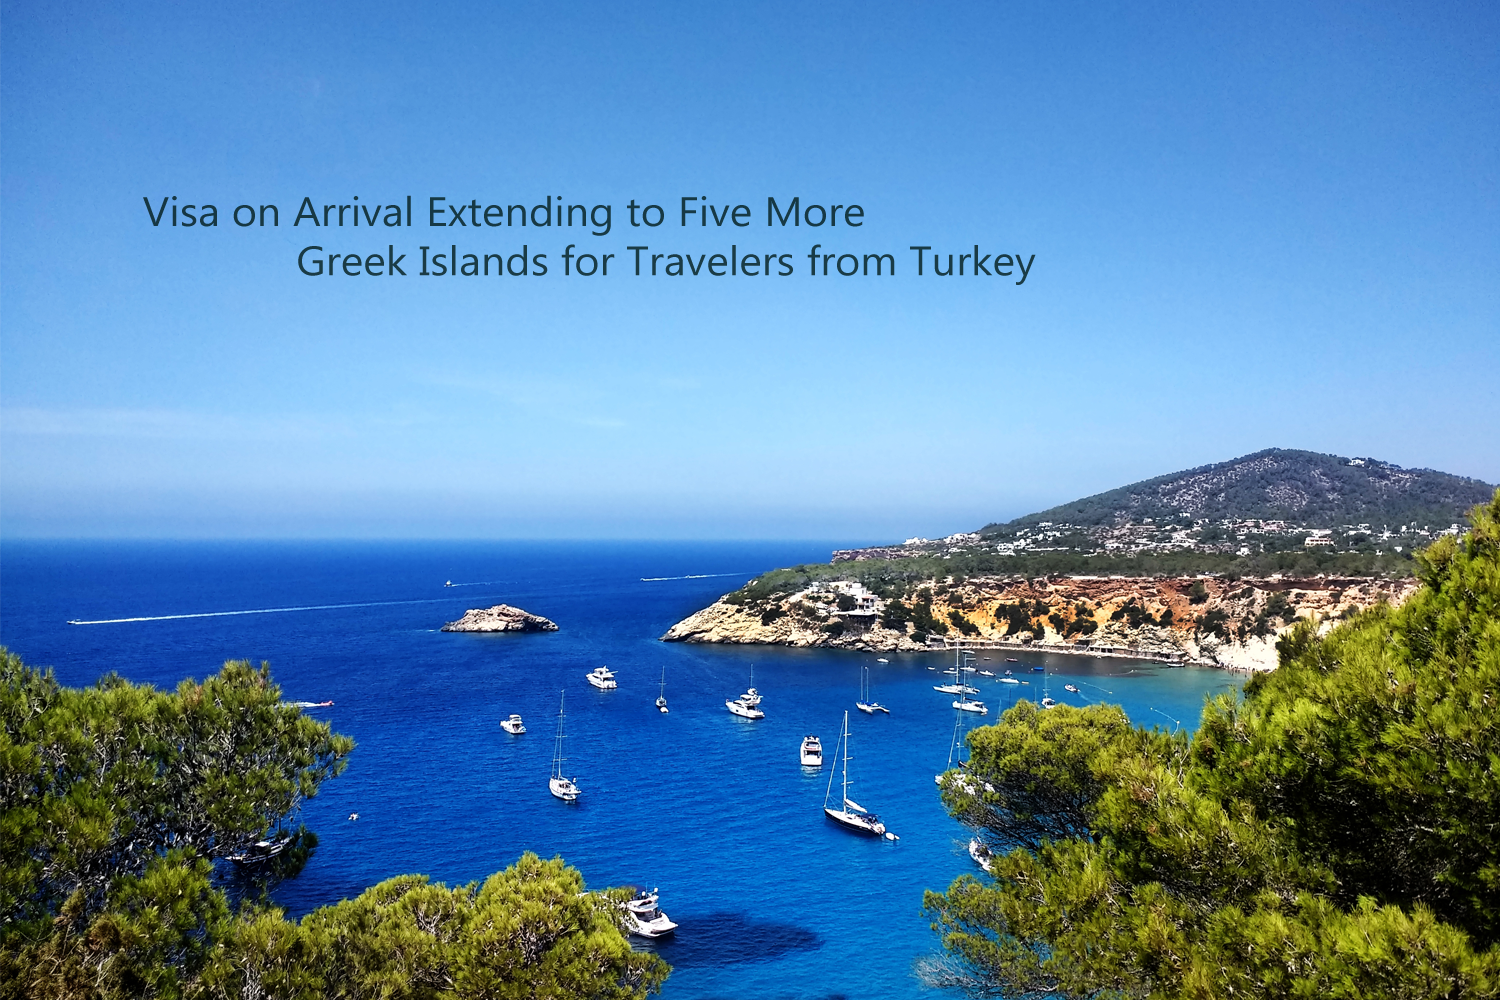 Visa on Arrival Extending to Five More Greek Islands for Travelers from Turkey.